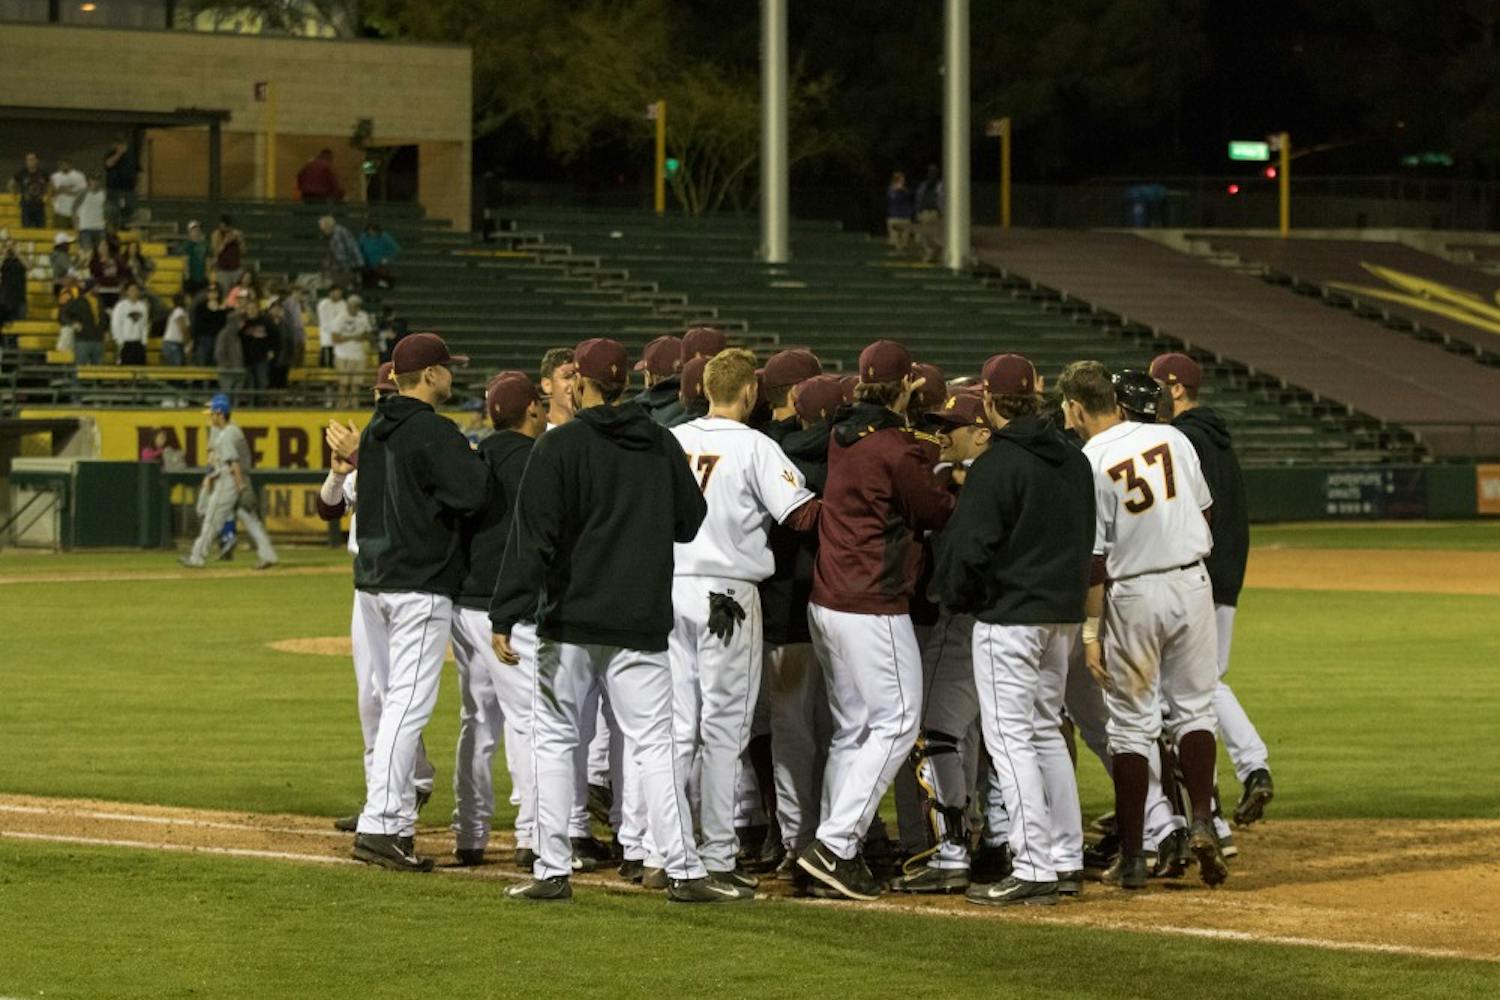 Arizona State baseball team celebrates their win after a walk off single by Junior Jordan Aboites against Cal State Bakersfield at Phoenix Municipal Stadium on Thursday.